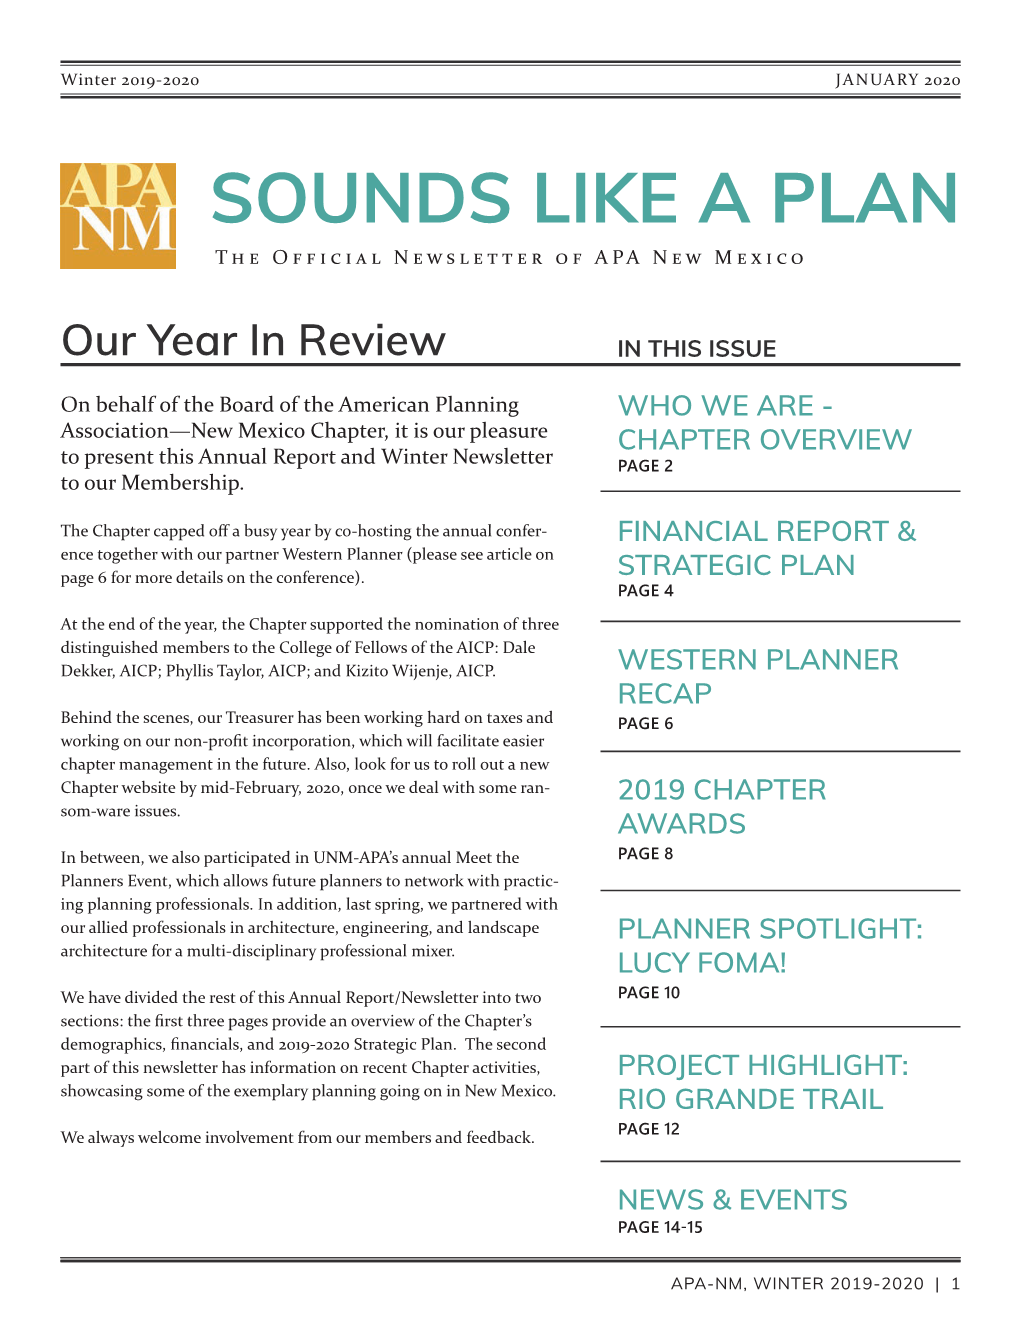 SOUNDS LIKE a PLAN the Official Newsletter of APA New Mexico